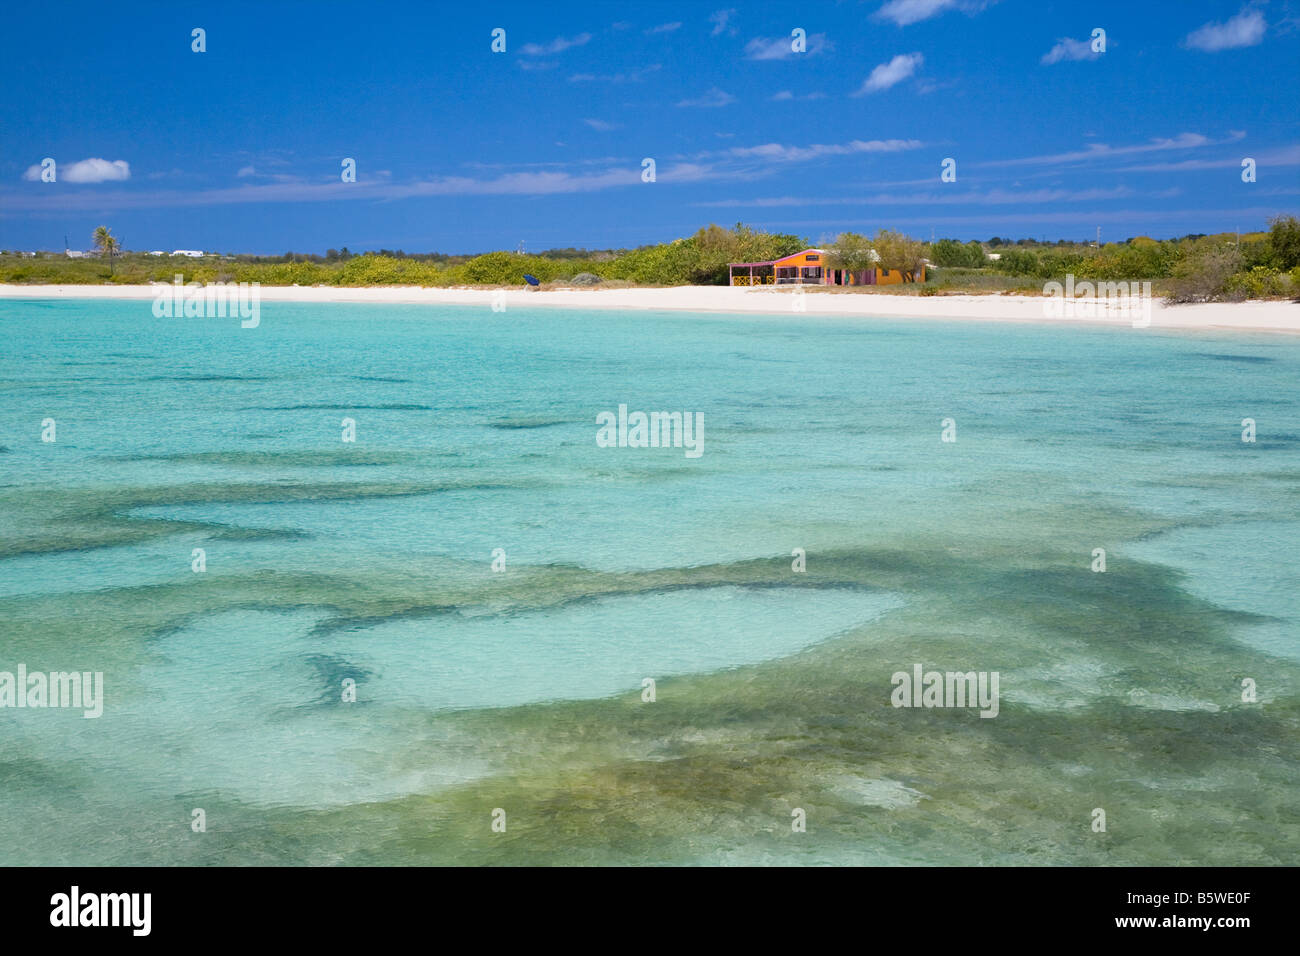 Cove Bay on the caribbean island of Anguilla in the British West Indies Stock Photo